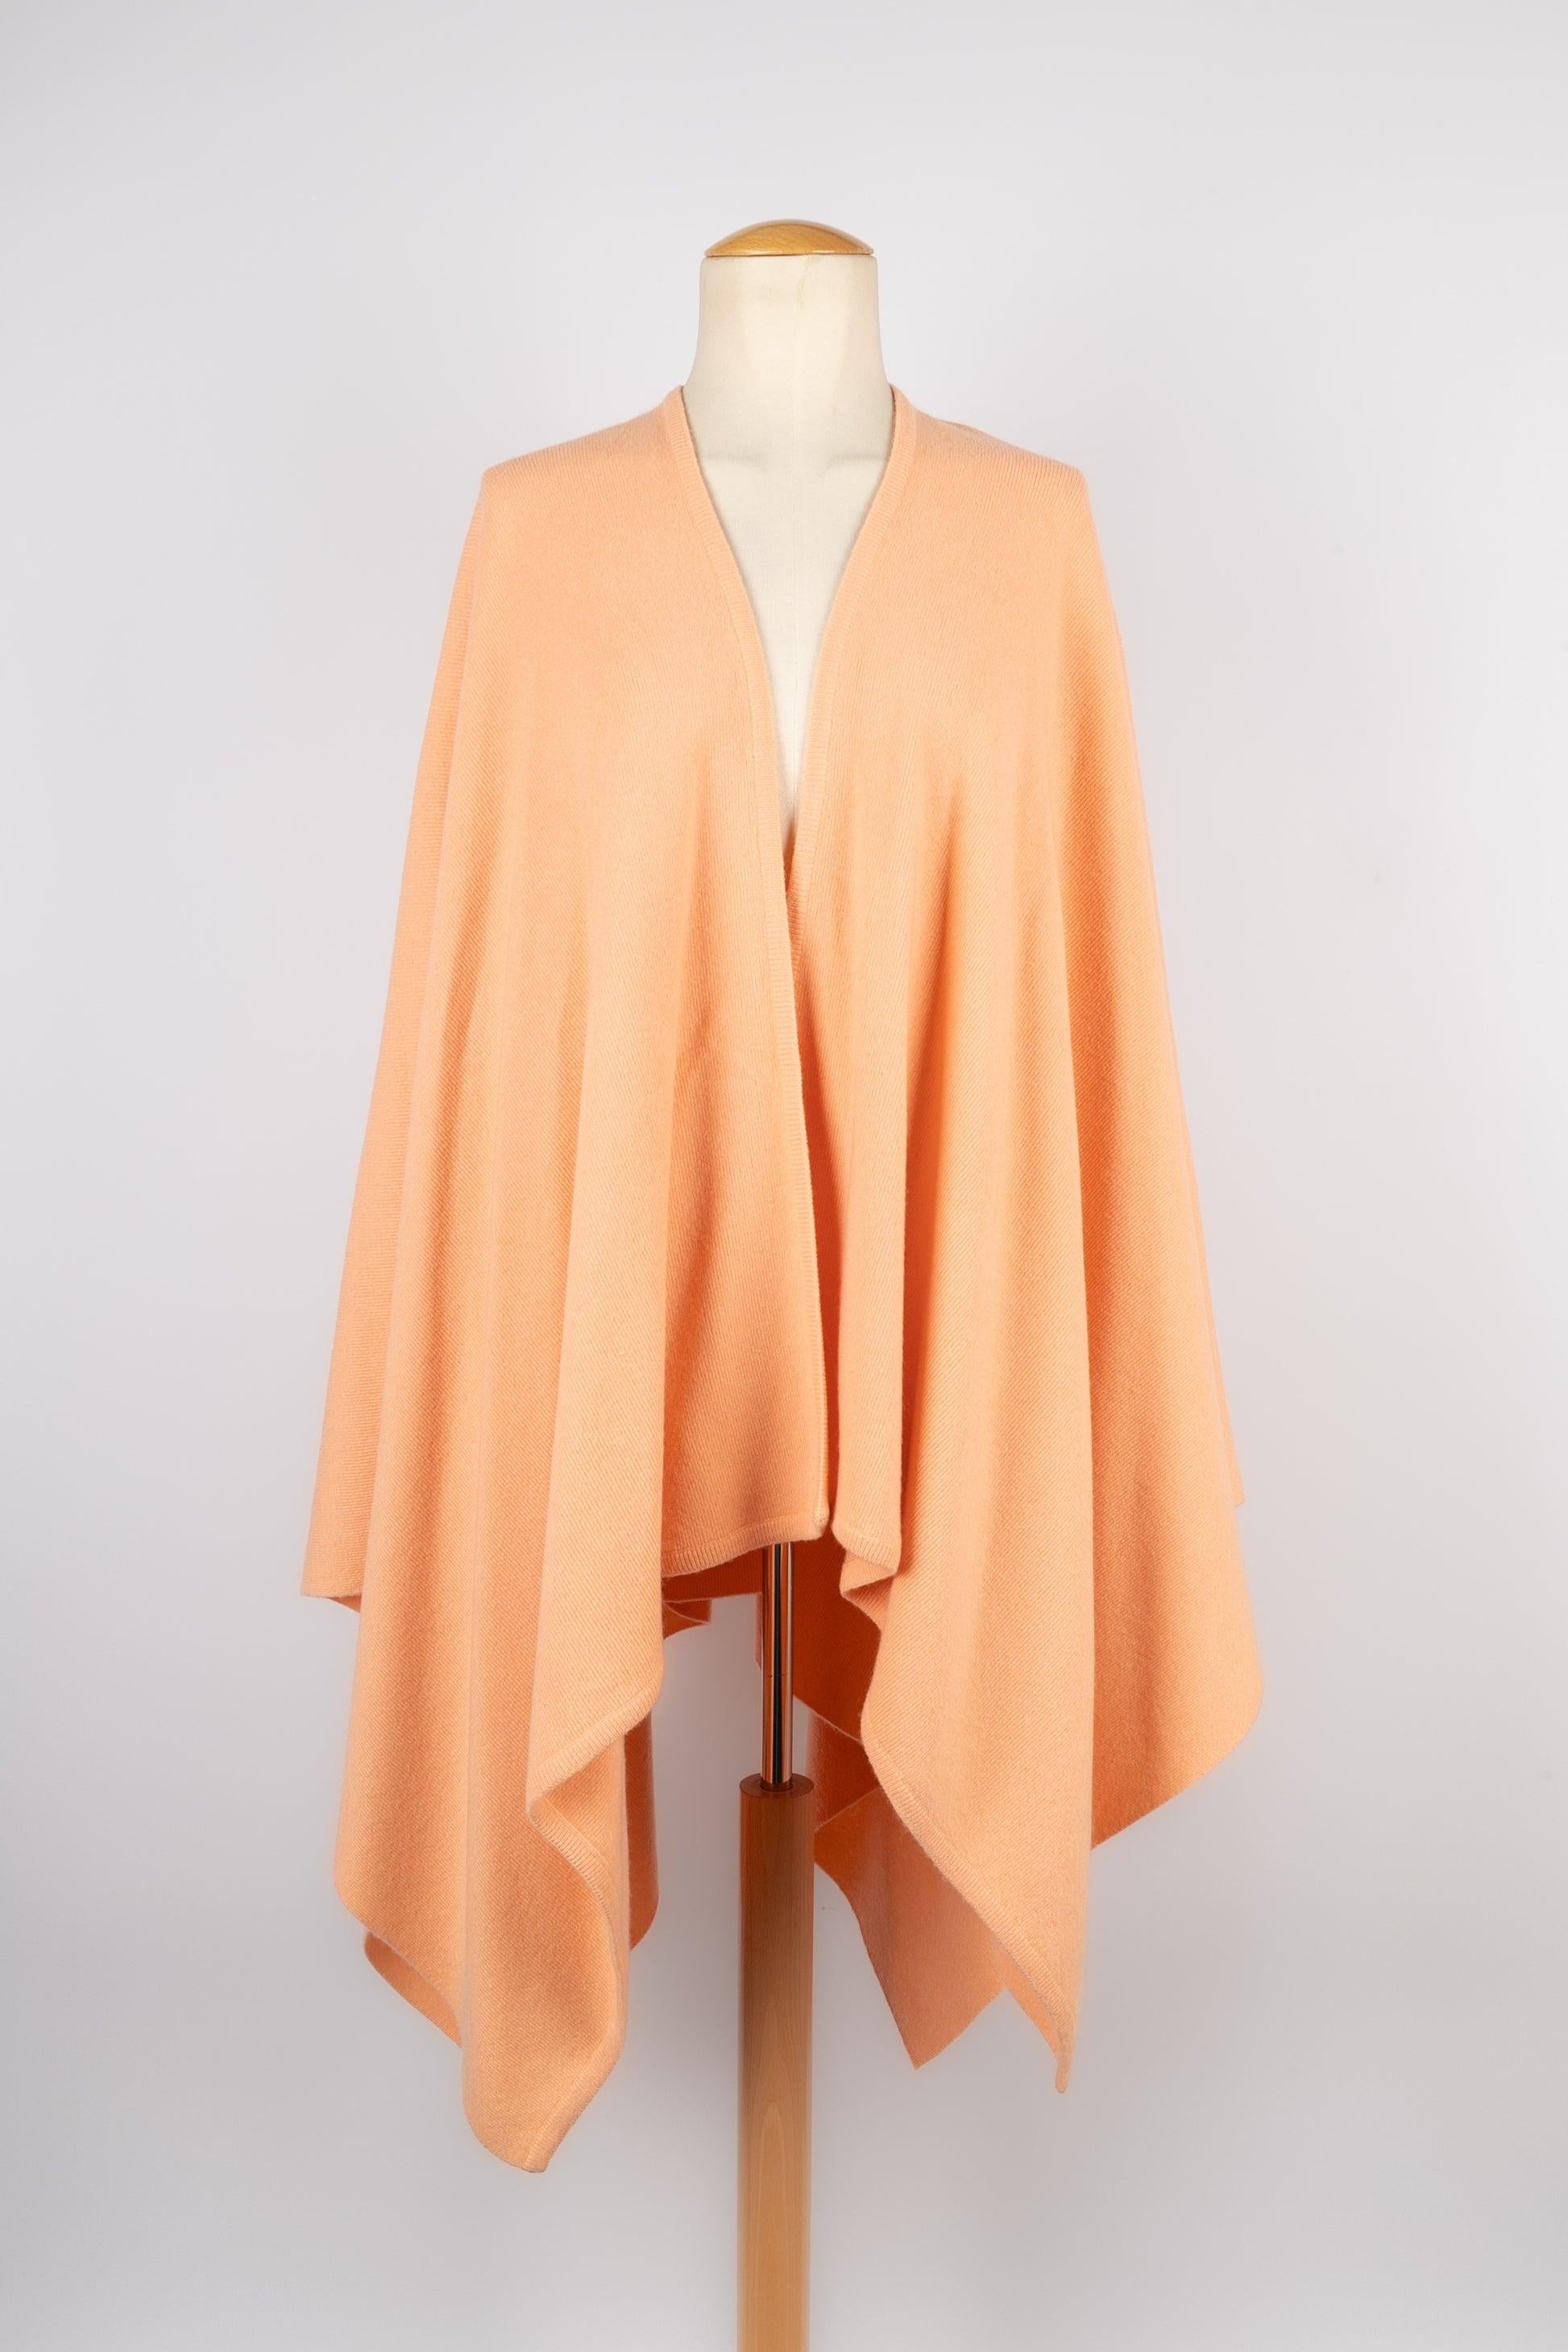 Nina Ricci - (Made in Scotland) Orange cashmere poncho.

Additional information:
Condition: Very good condition
Dimensions: Length: 168 cm - Height: 80 cm

Seller Reference: FV25